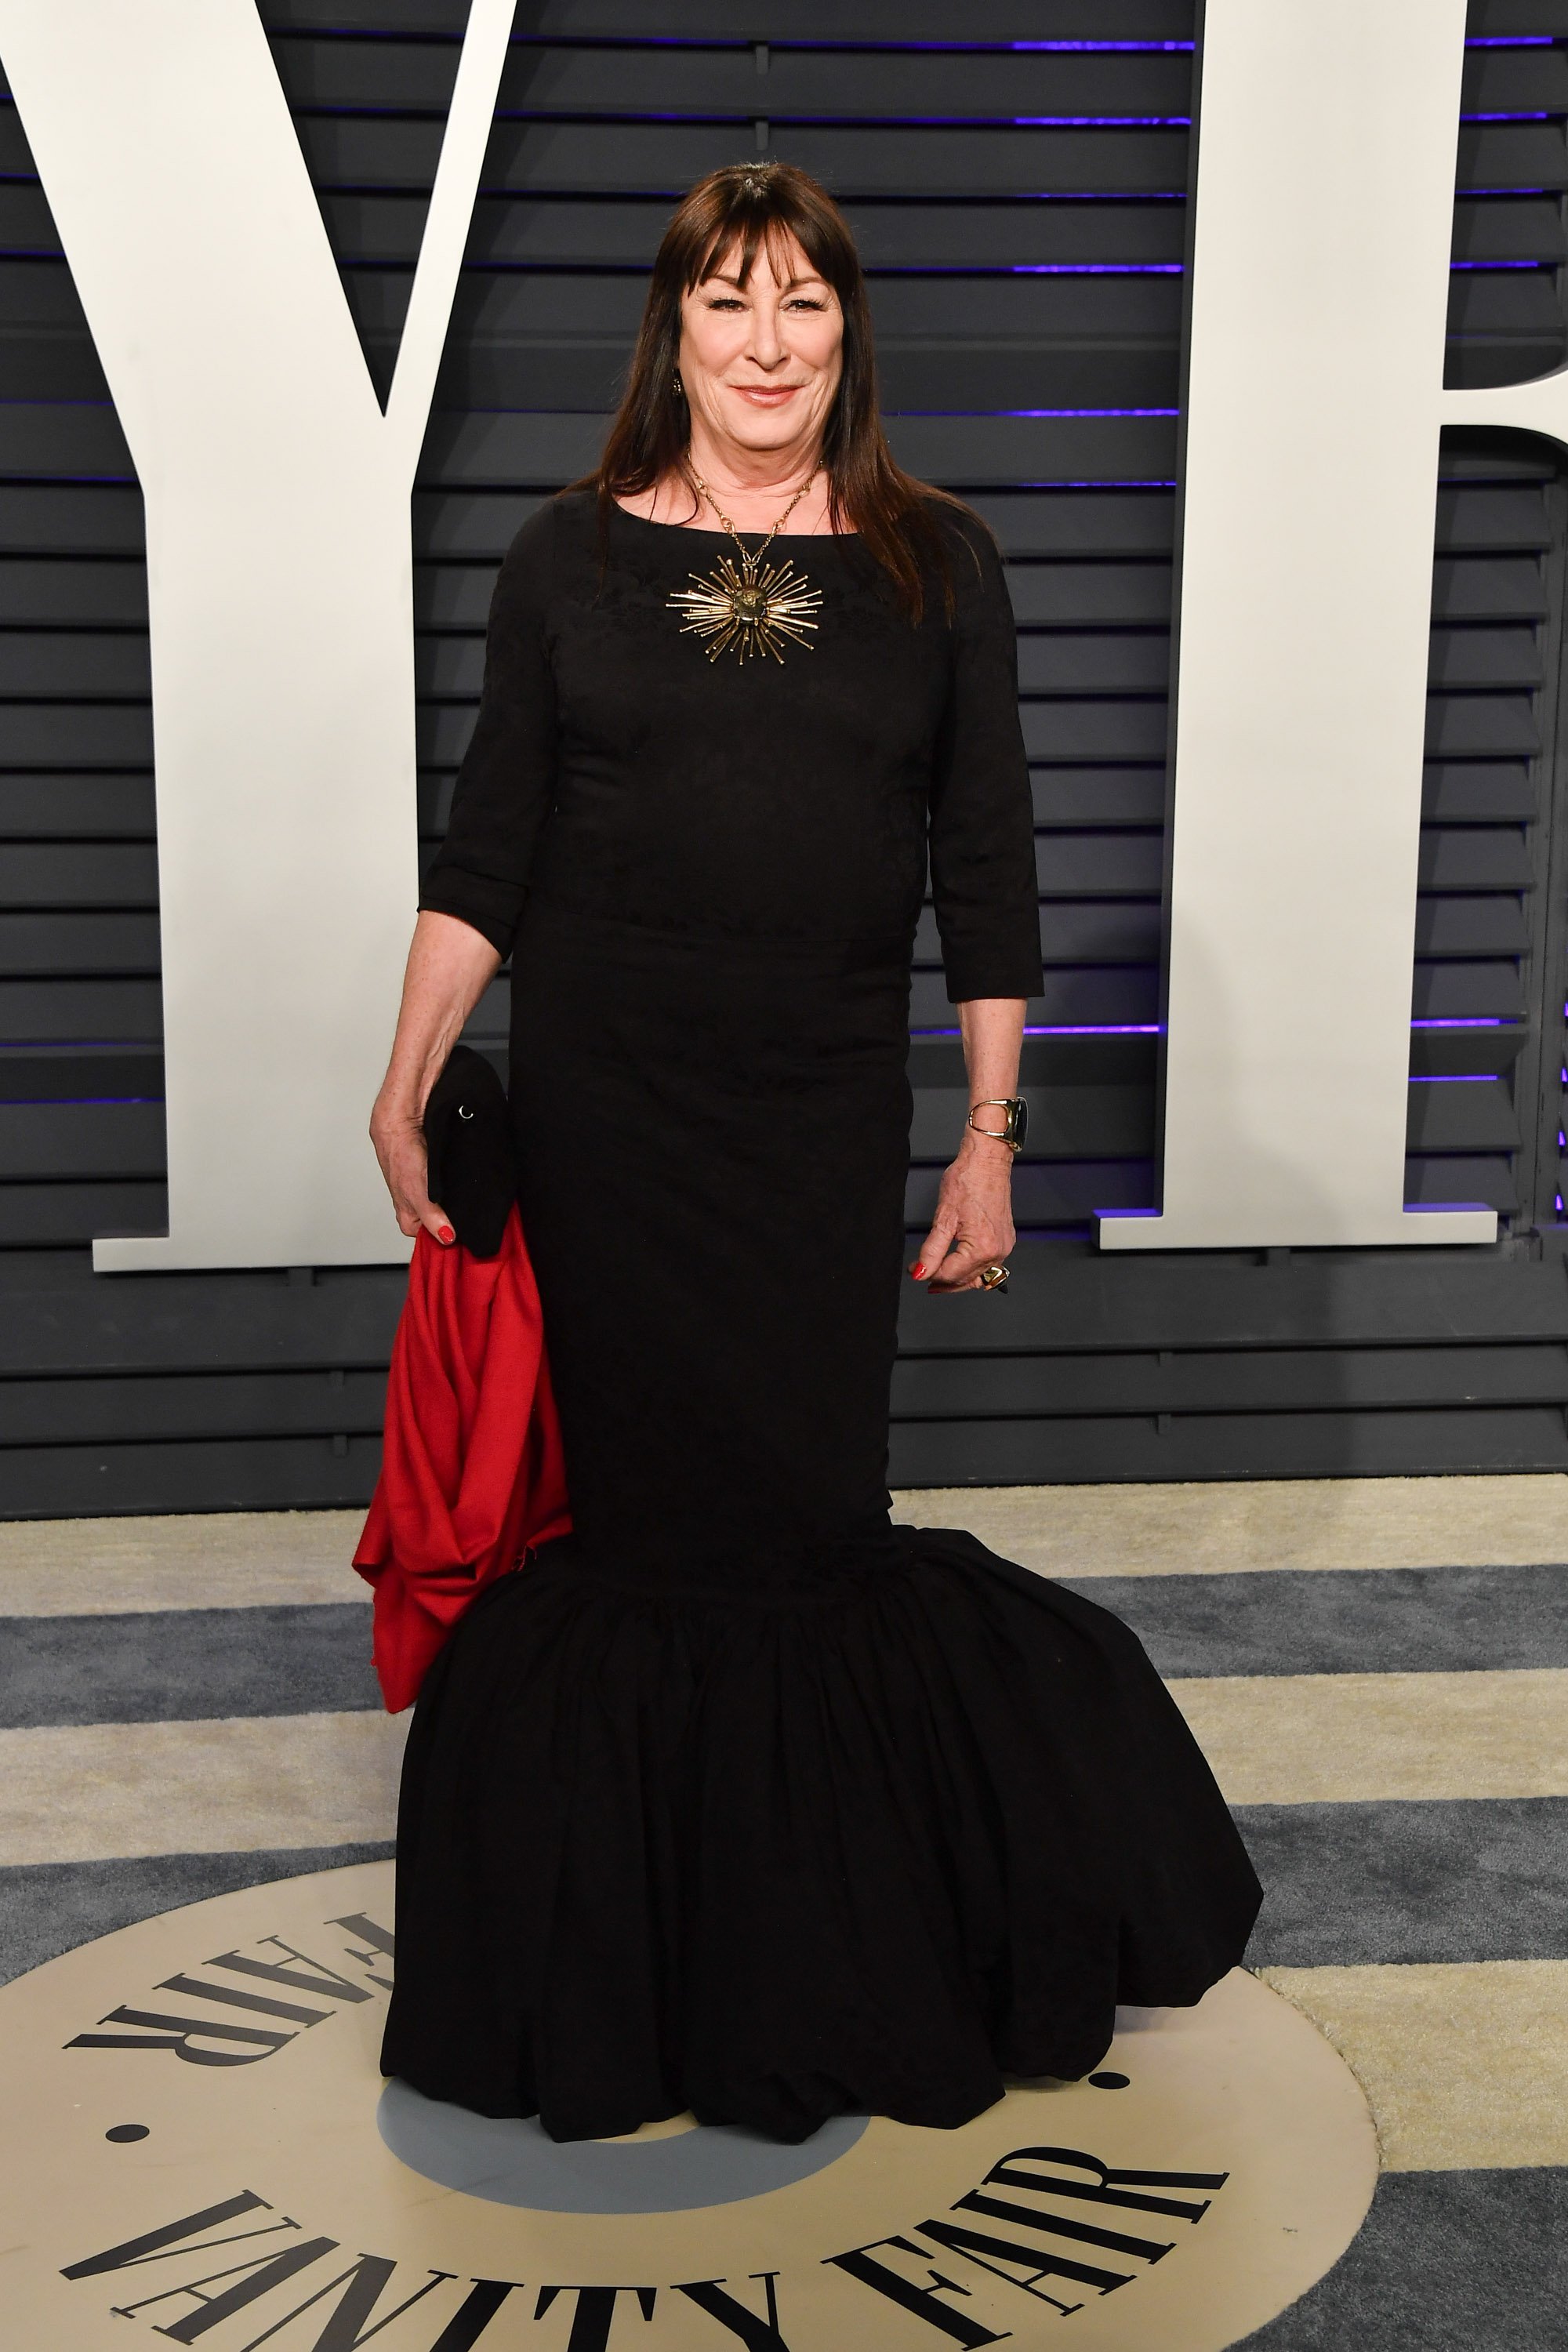 Getty Images l Anjelica Huston at the 2019 Vanity Fair Oscar Party hosted by Radhika Jones on February 24, 2019 in Beverly Hills, California